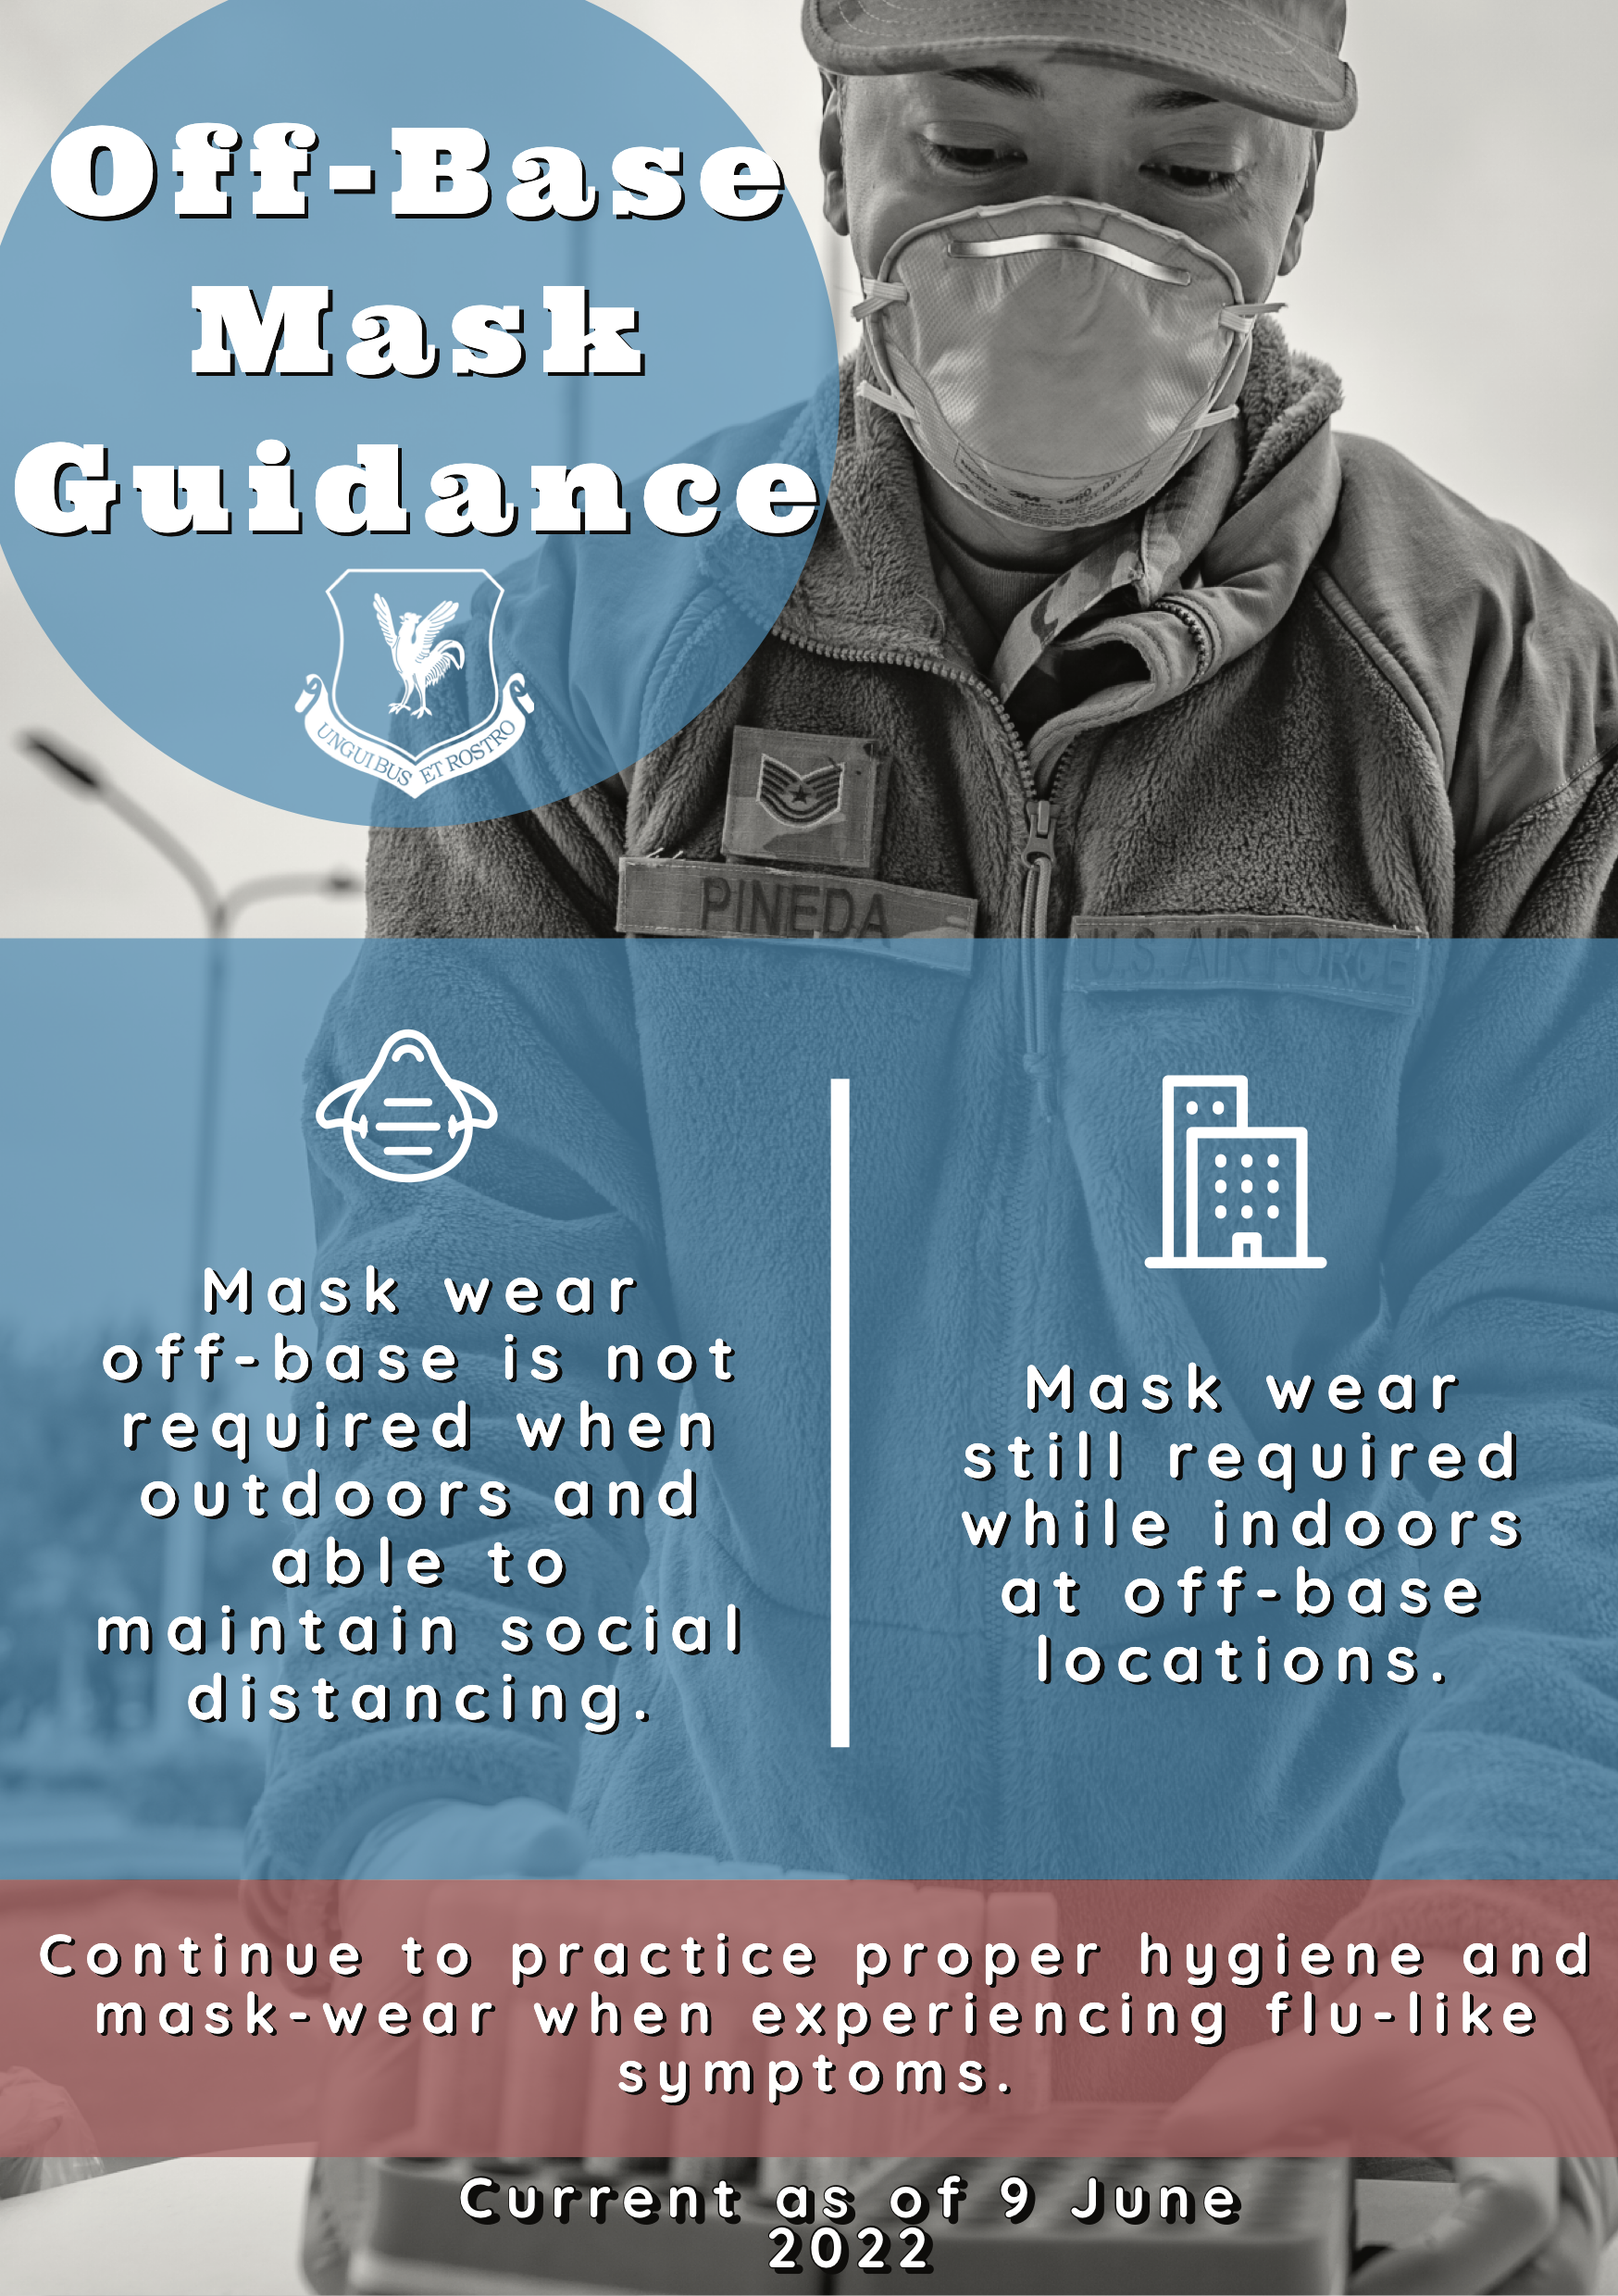 Offbase Mask Guidance Graphic